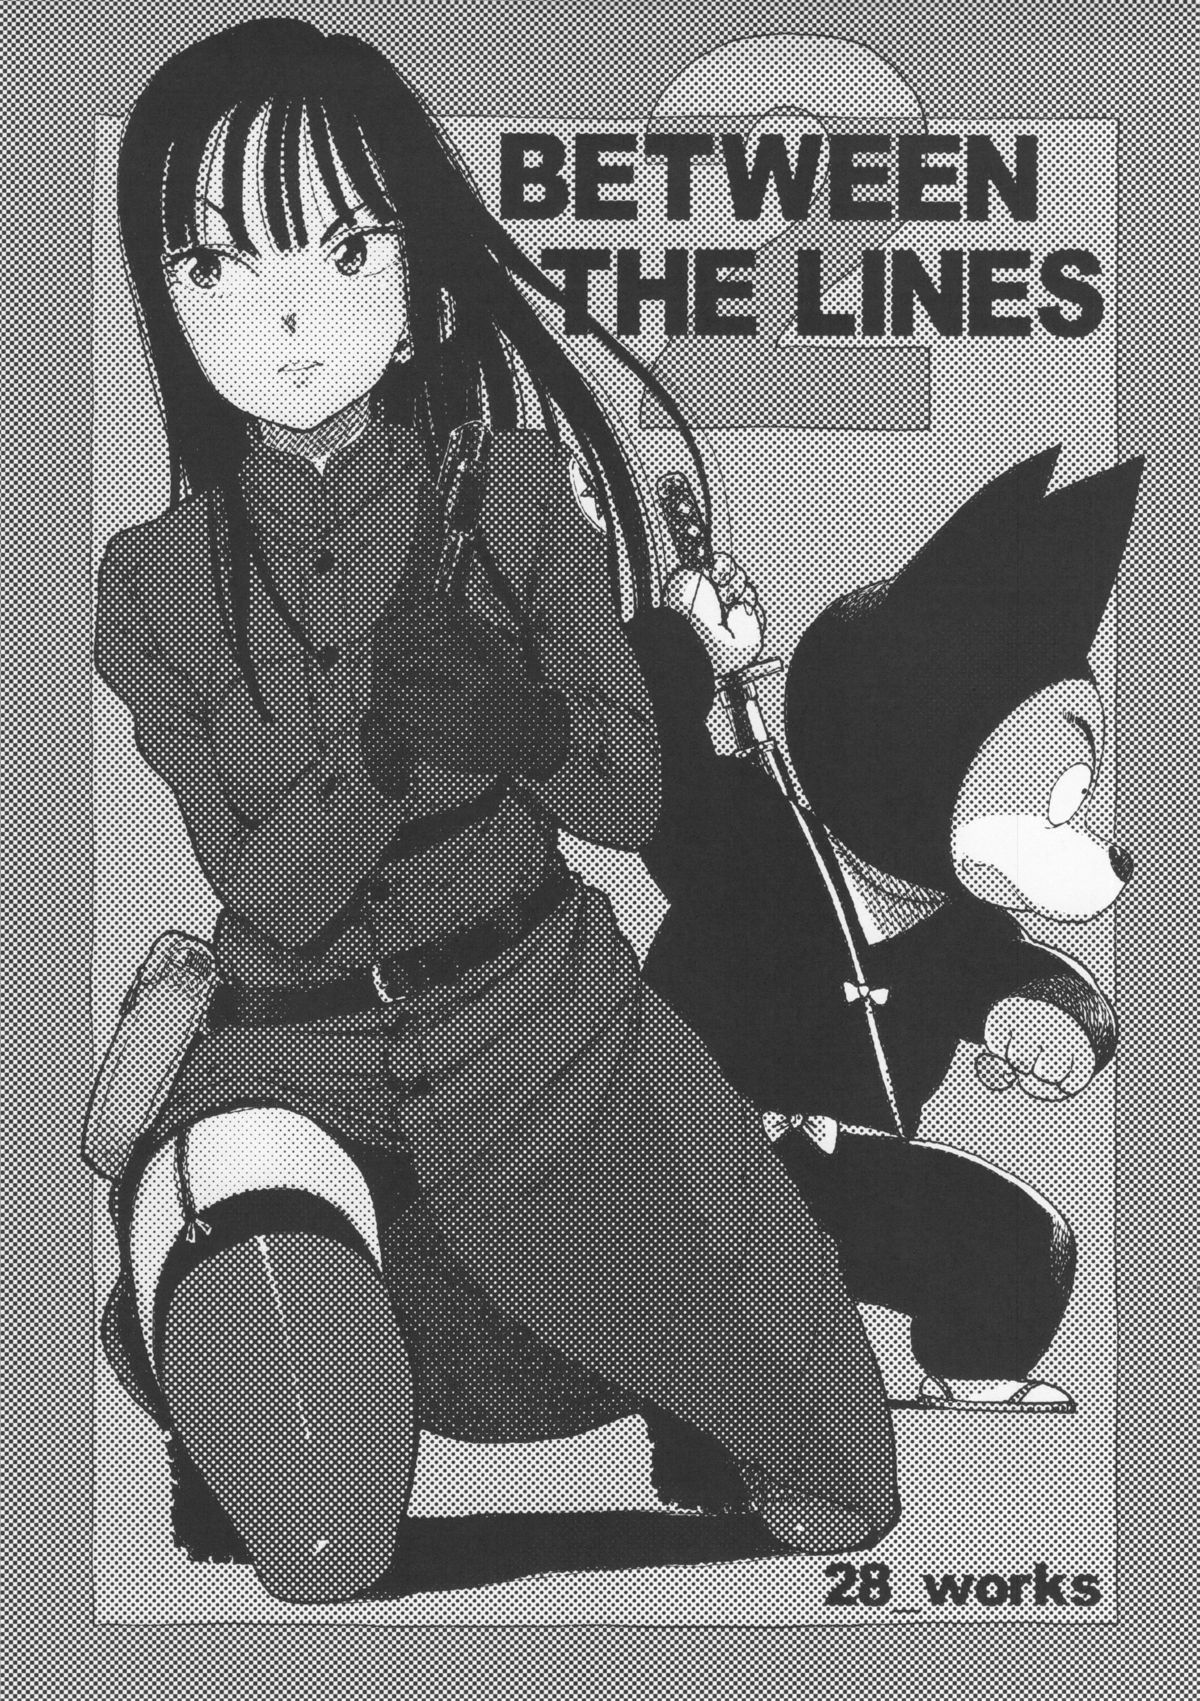 (C83) [28_works (Oomori Harusame, Hayo.)] BETWEEN THE LINES 2 (Dragon Ball) page 2 full